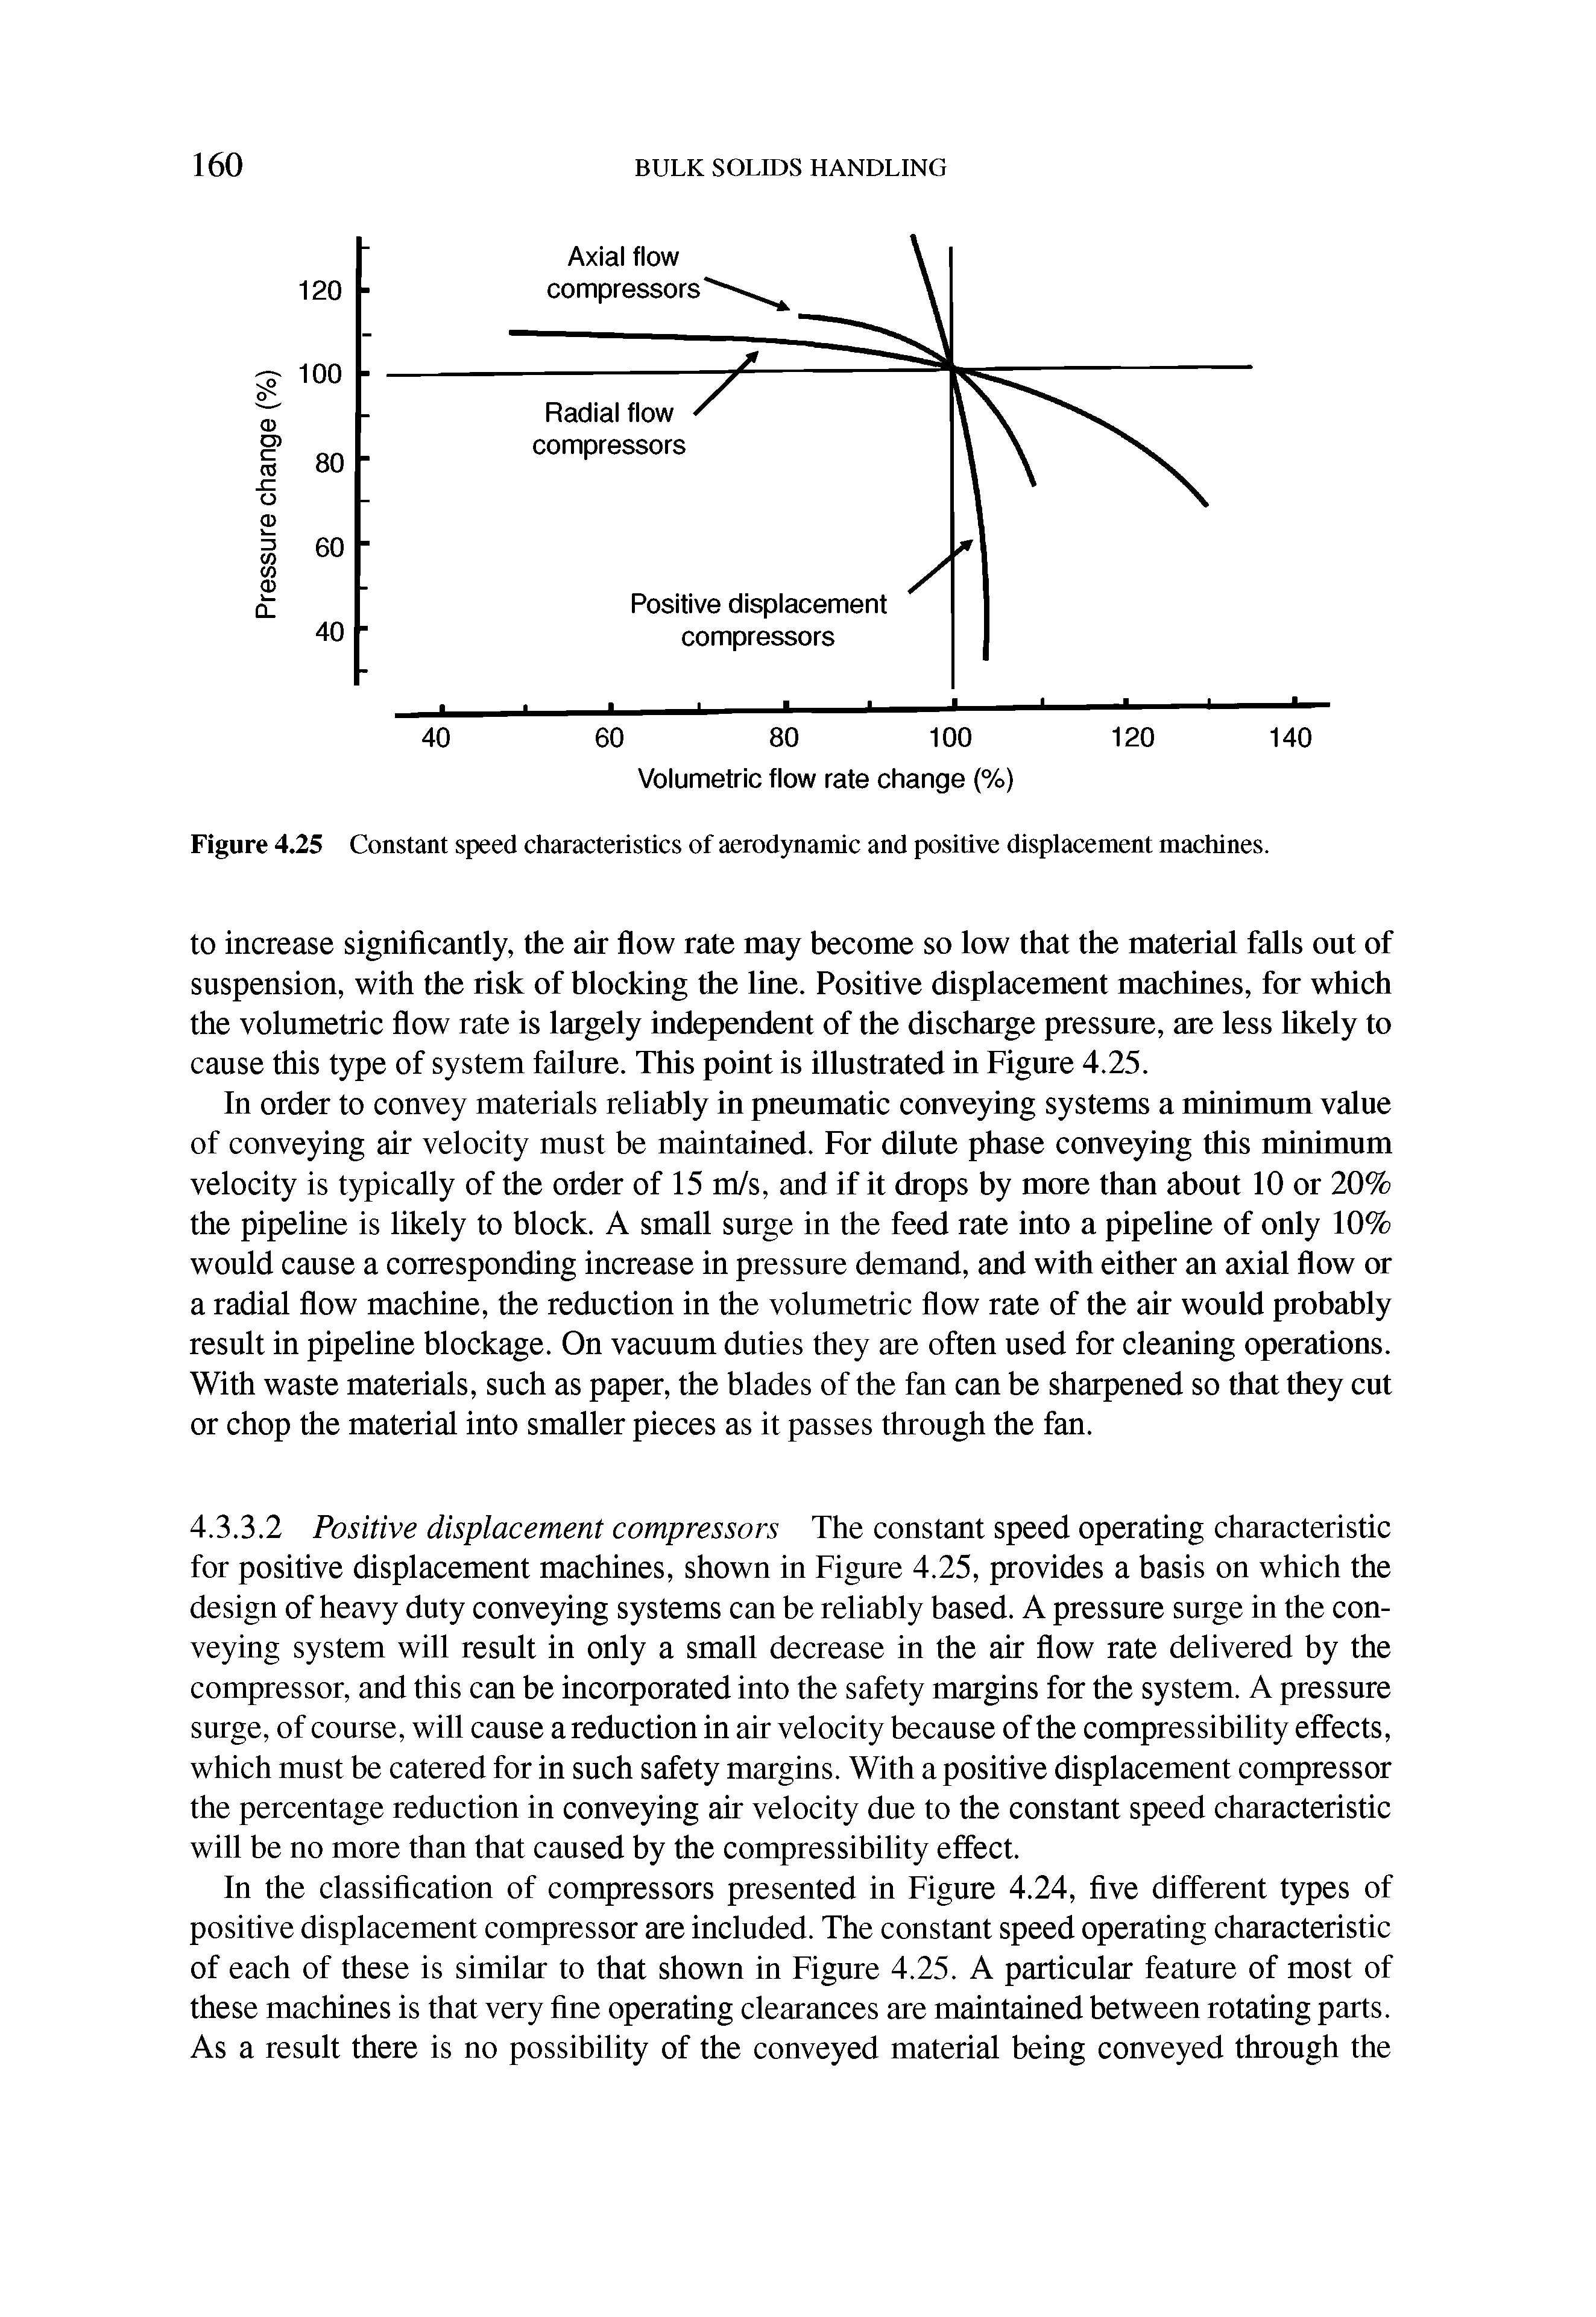 Figure 4.25 Constant speed characteristics of aerodynamic and positive displacement machines.